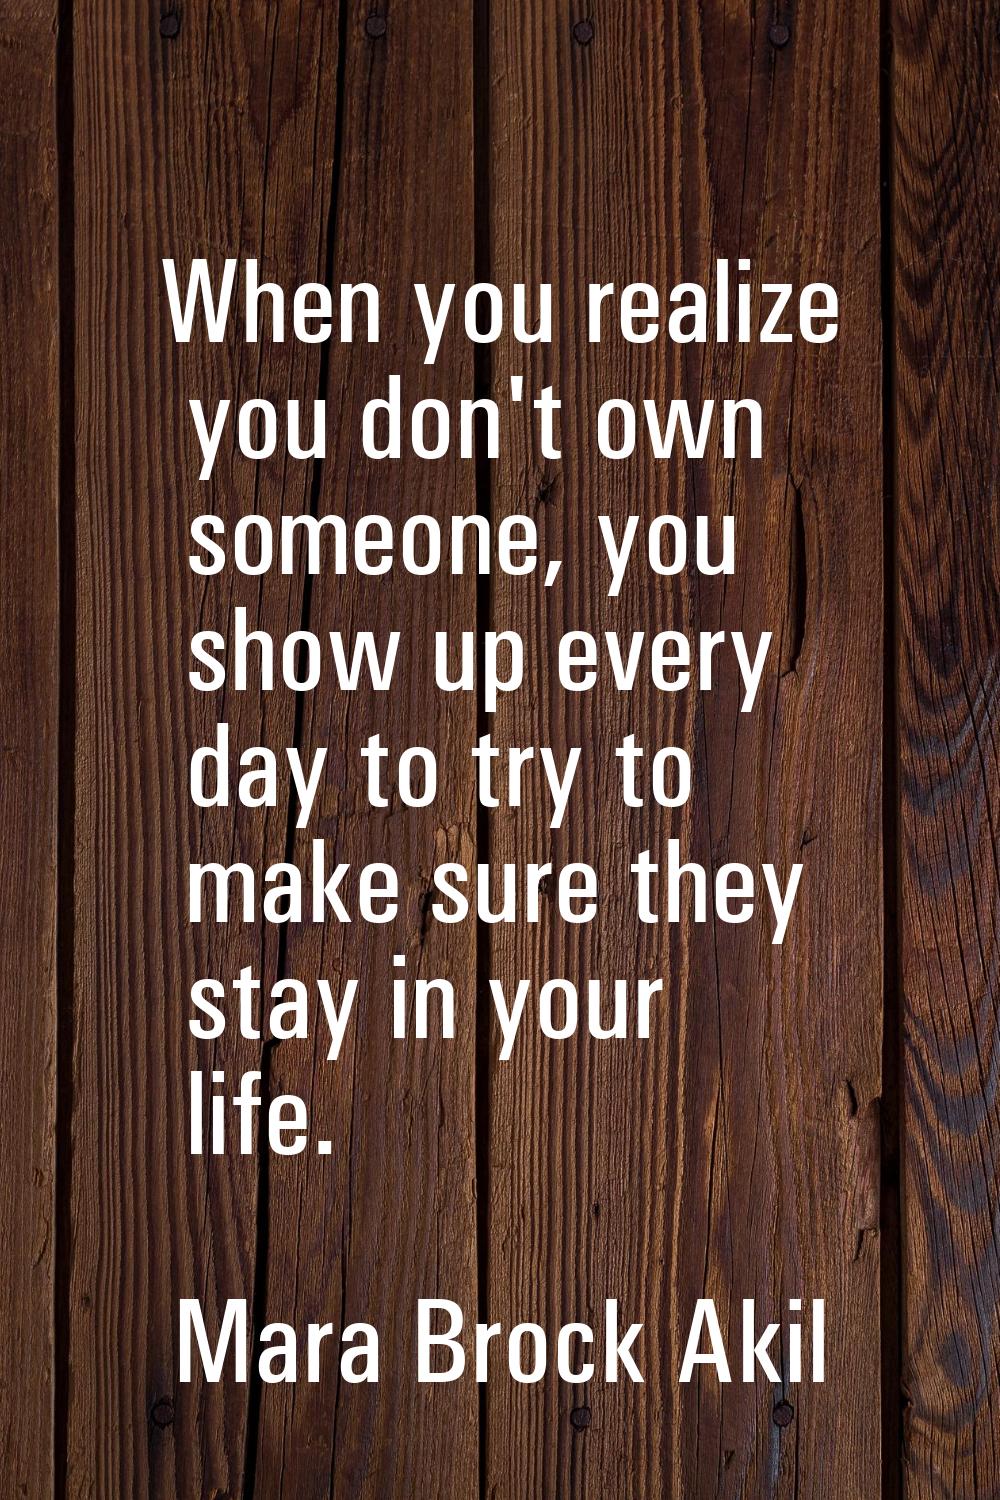 When you realize you don't own someone, you show up every day to try to make sure they stay in your